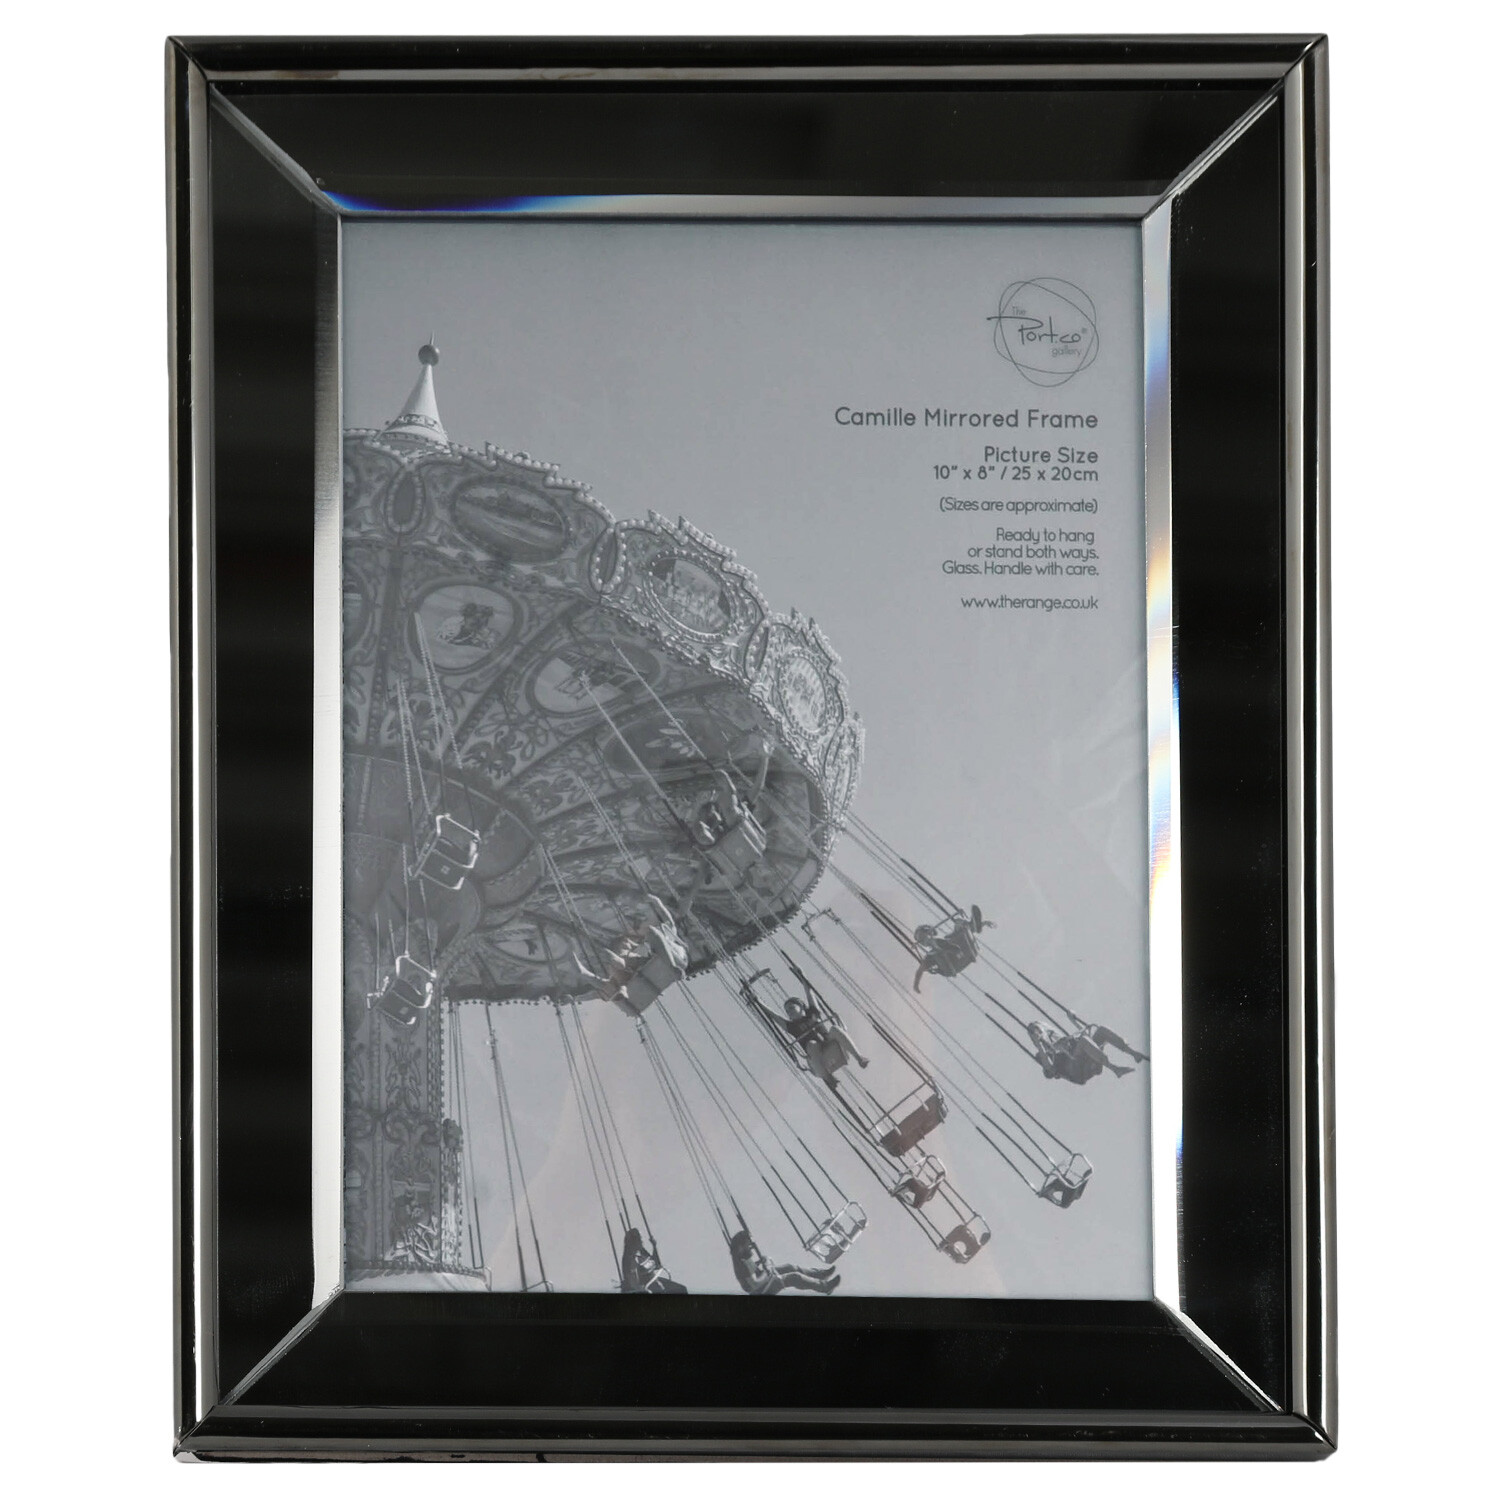 The Port. Co Gallery Camille Black Mirrored Photo Frame 10 x 8 inch Image